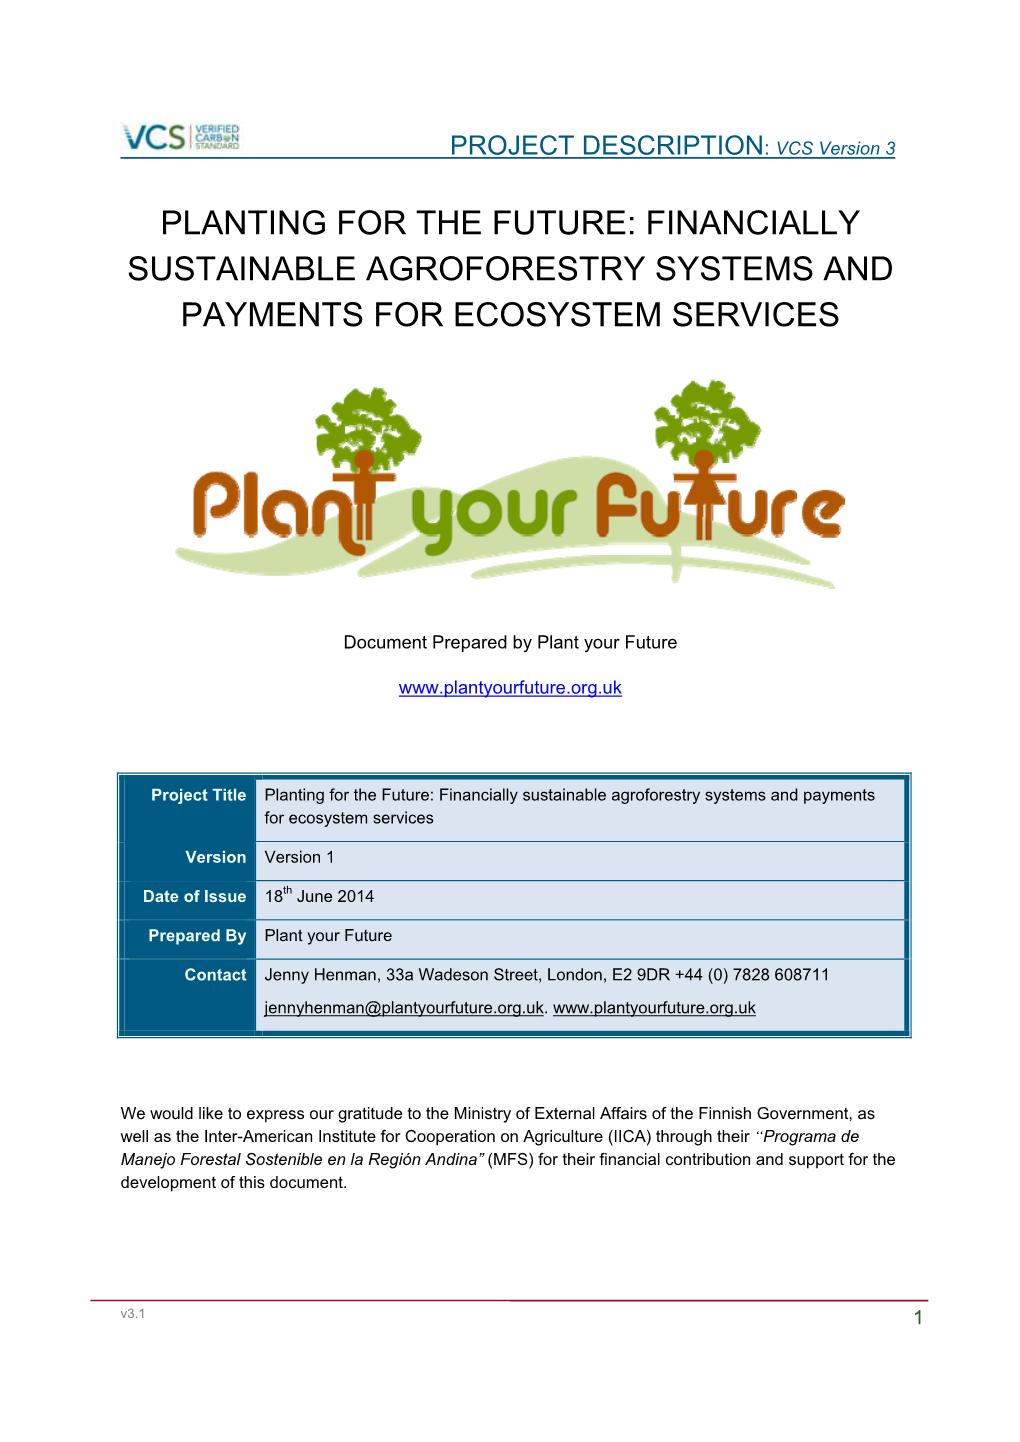 Planting for the Future: Financially Sustainable Agroforestry Systems and Payments for Ecosystem Services